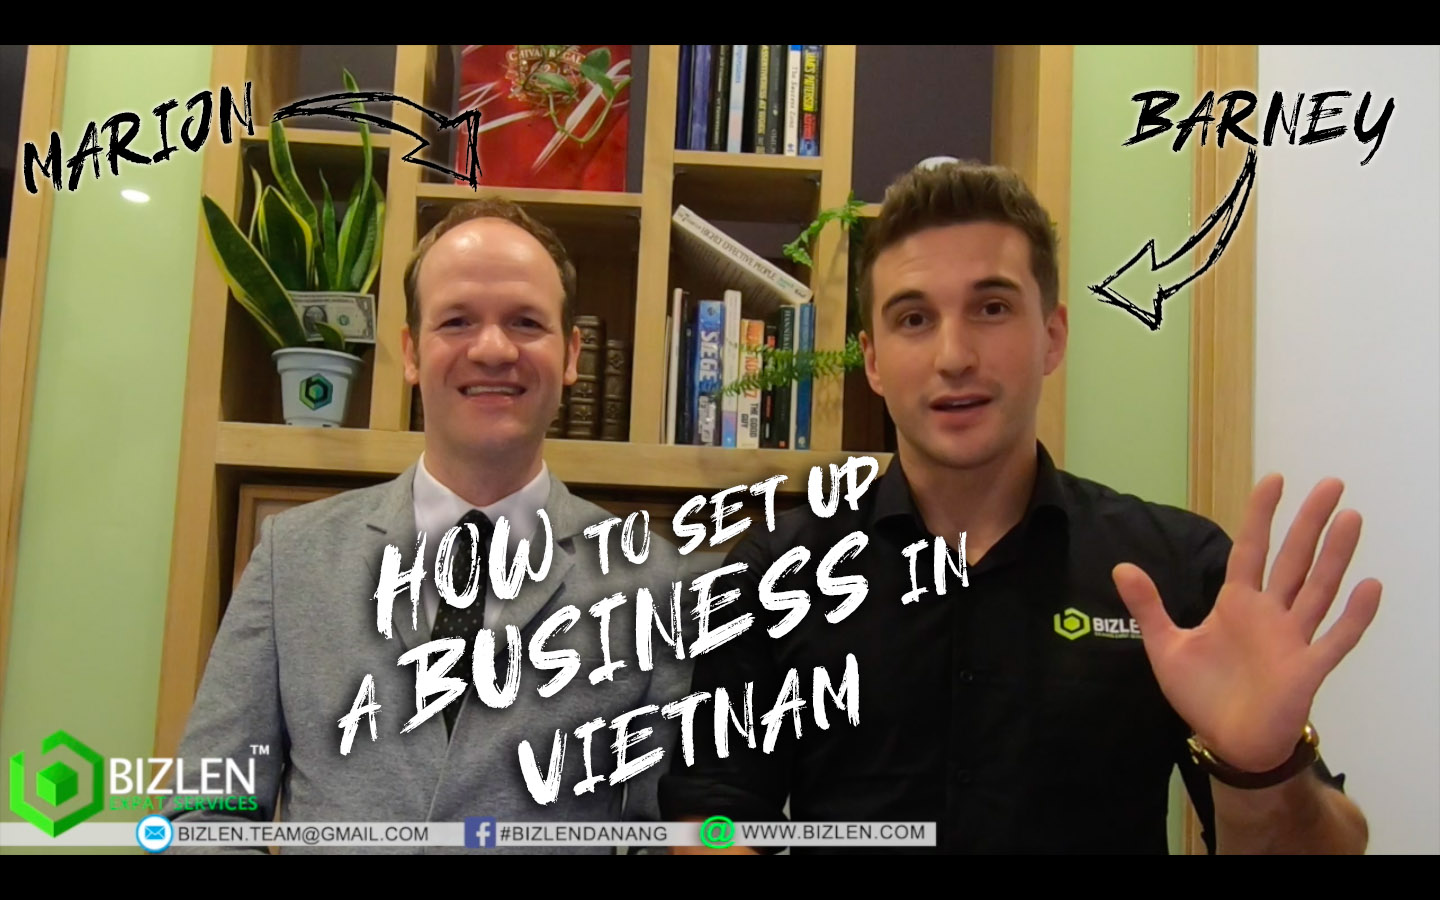 How to set up a company in Vietnam